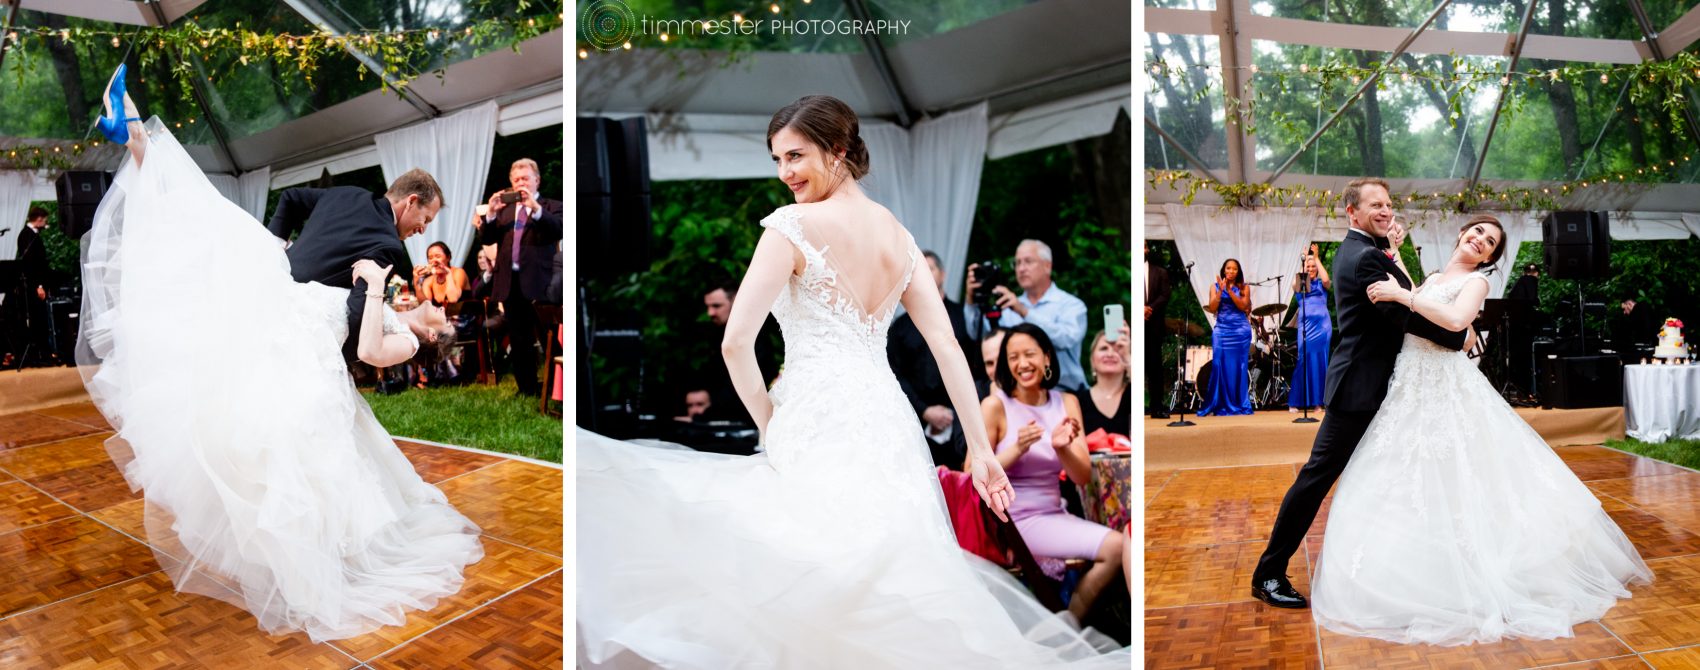 A First Dance waltz by the bride and groom at their private home reception in Northern Virginia.